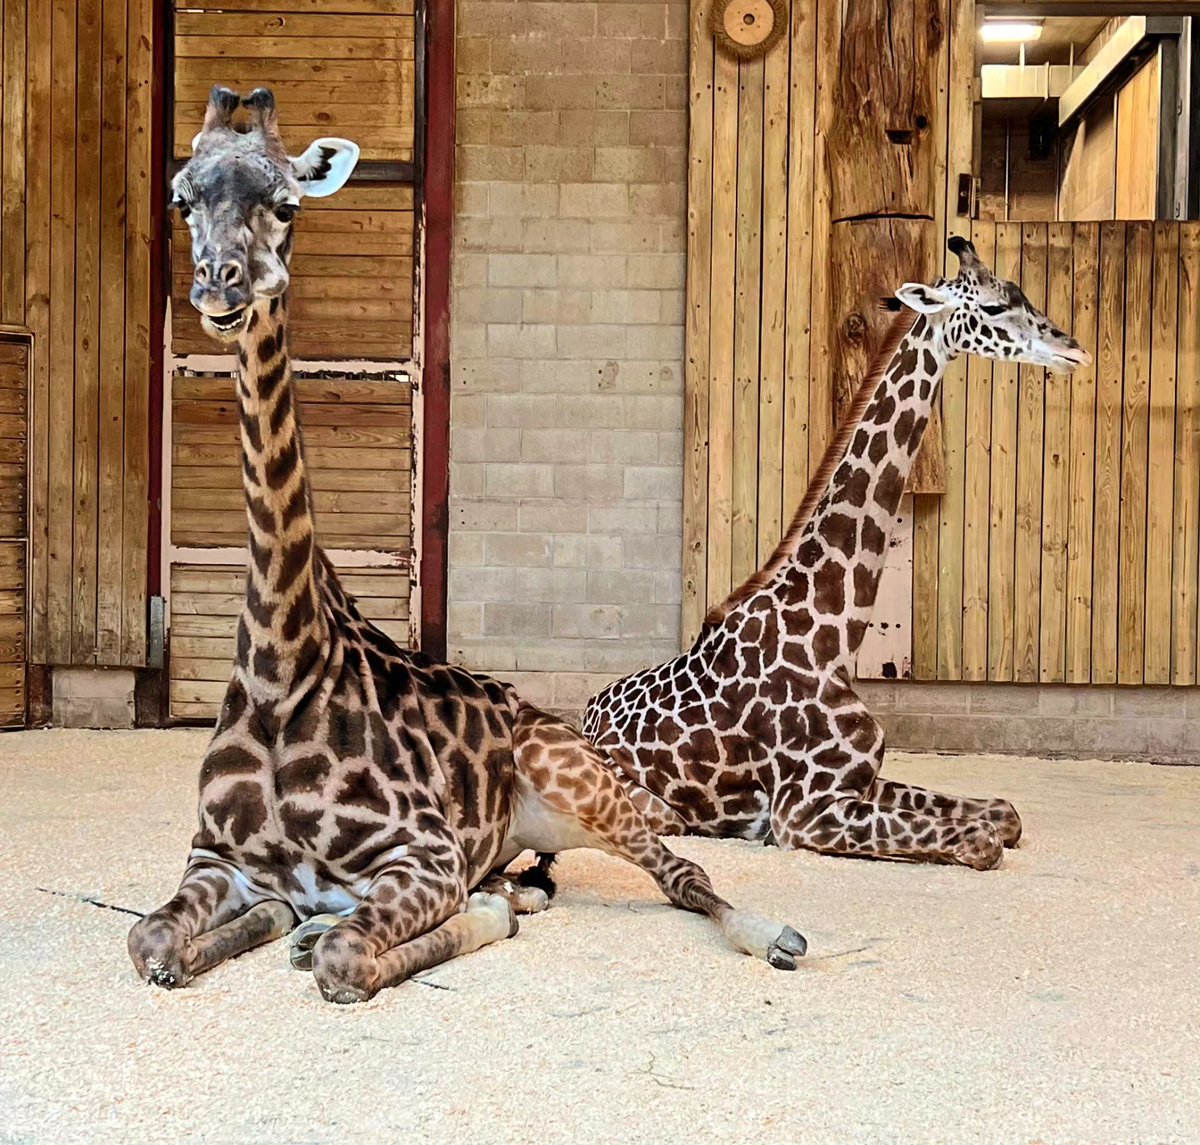 #TGIF 🦒Thank giraffe it’s Friday! Did you know giraffes only need 5 to 30 minutes of sleep in a 24-hour period?